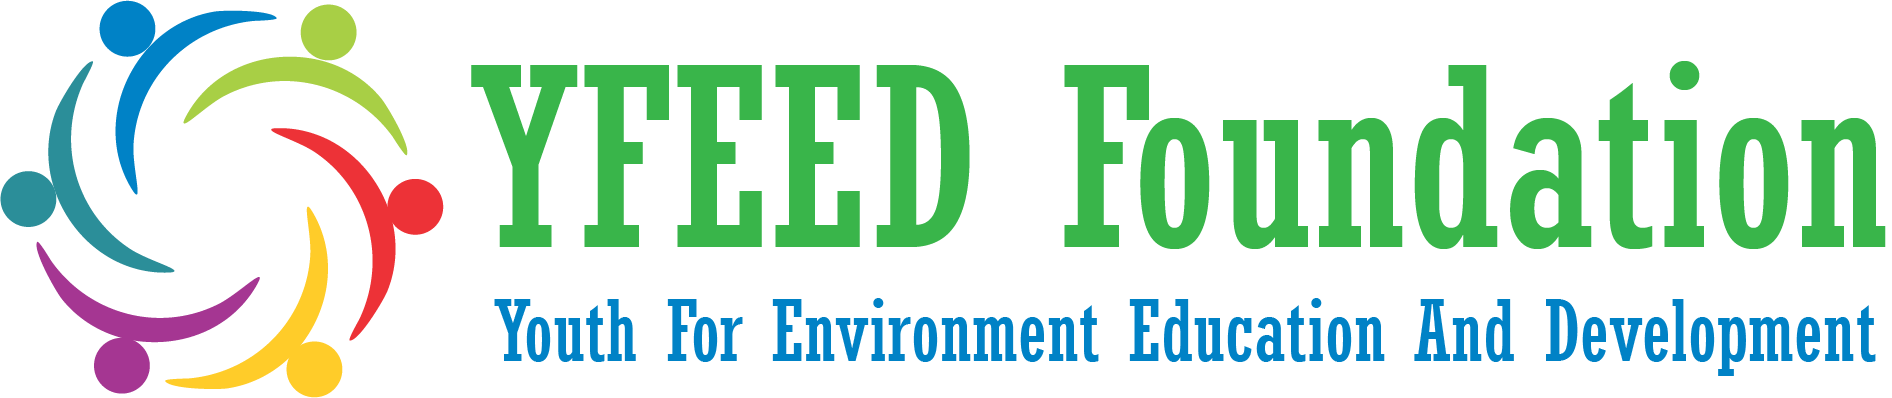 4 Youth For Environment Education And Development Foundation